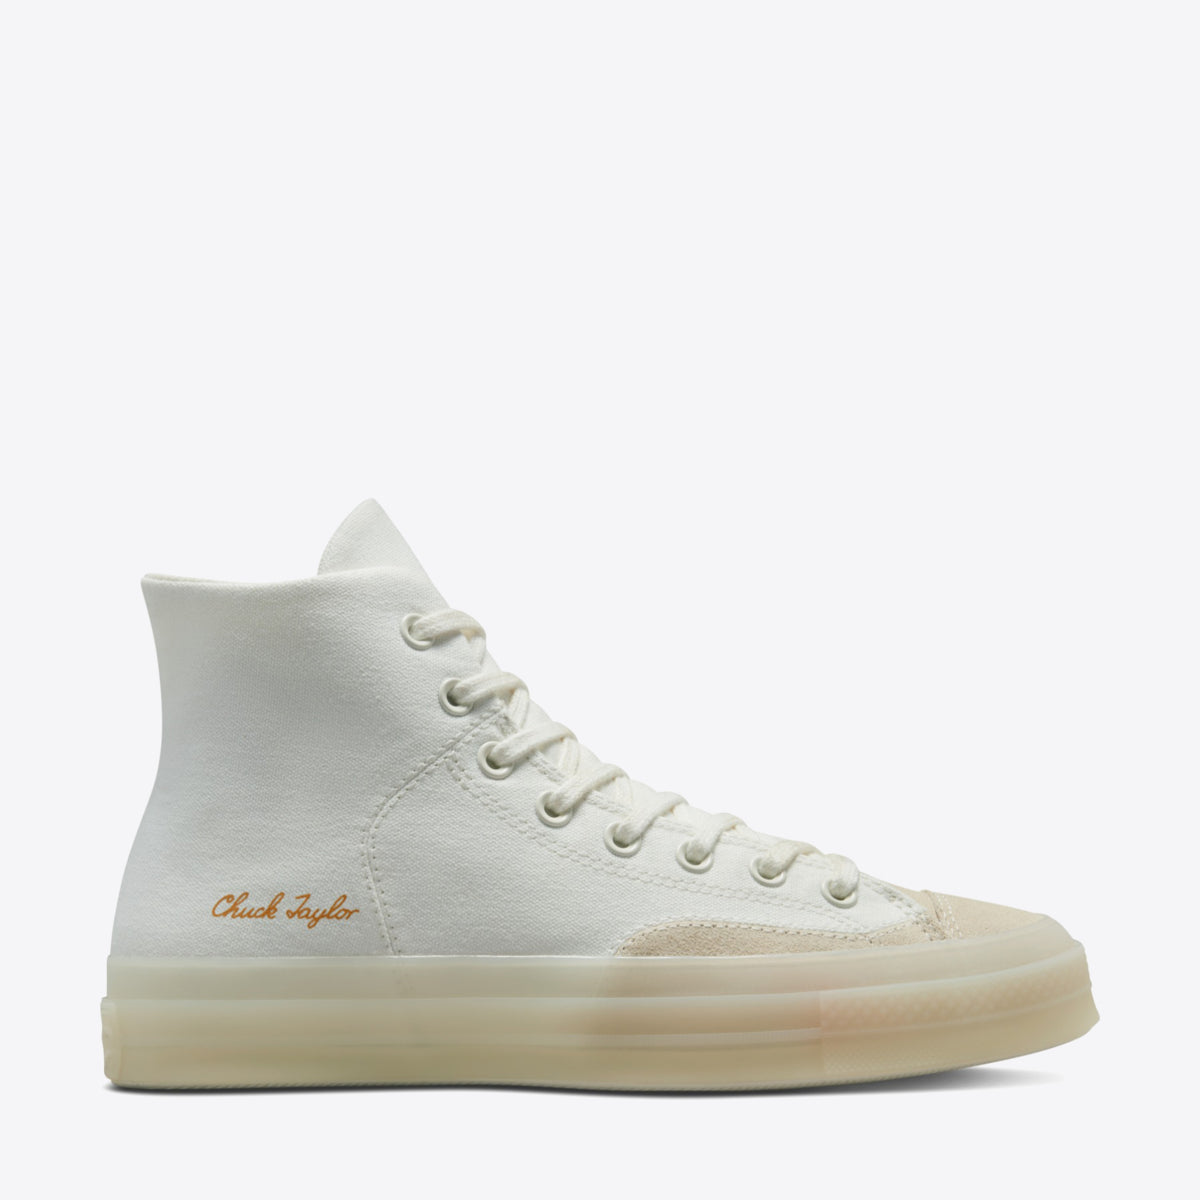 CONVERSE Chuck Taylor 70 Marquis High Vintage White - Image 4